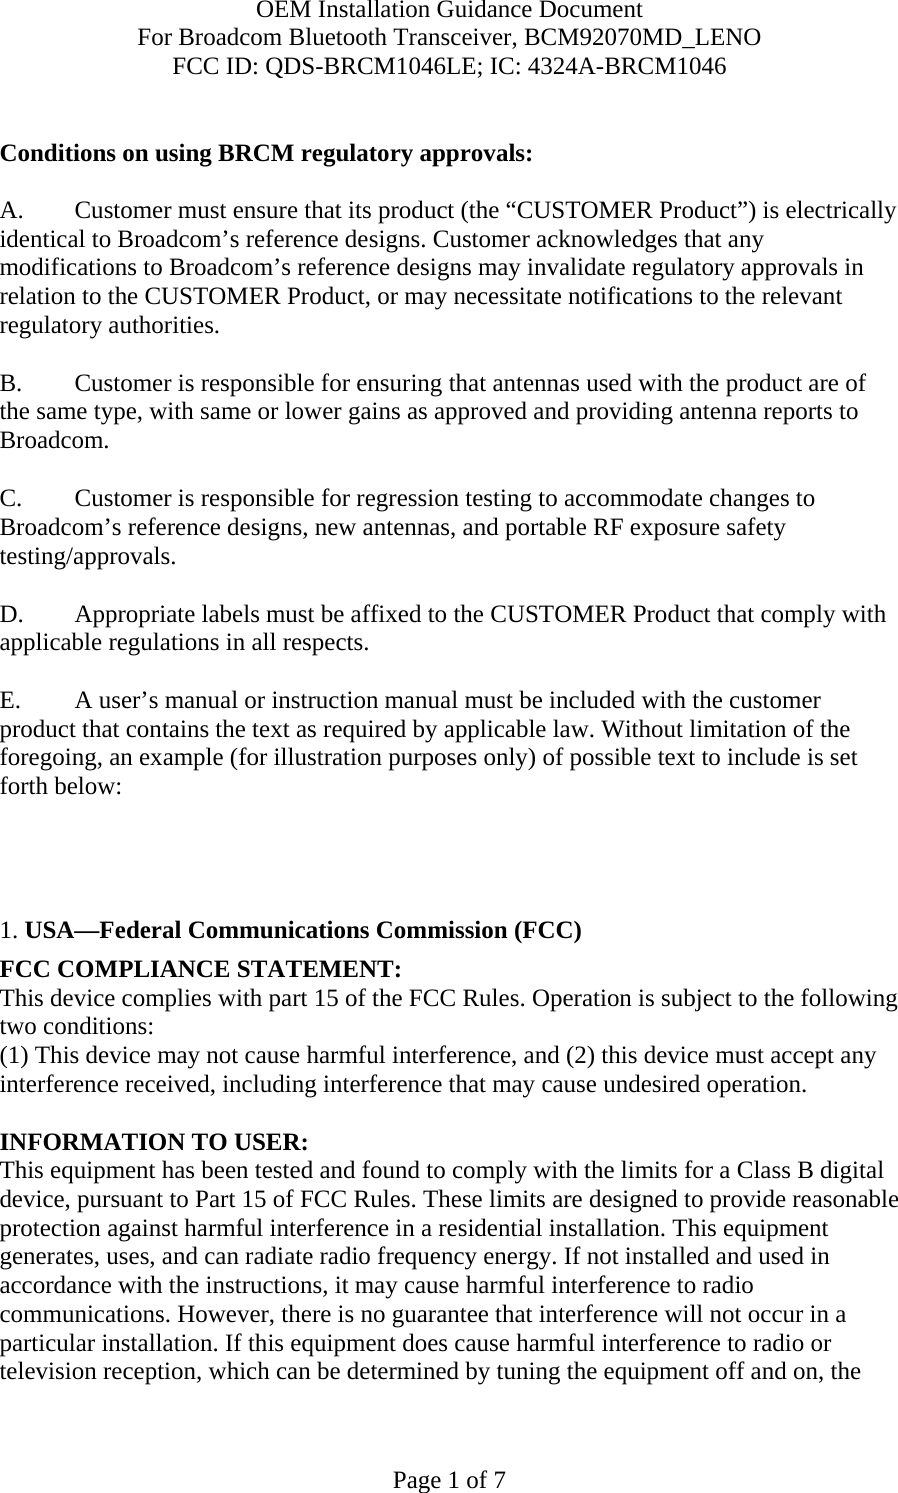 OEM Installation Guidance Document For Broadcom Bluetooth Transceiver, BCM92070MD_LENO FCC ID: QDS-BRCM1046LE; IC: 4324A-BRCM1046  Page 1 of 7  Conditions on using BRCM regulatory approvals:   A.  Customer must ensure that its product (the “CUSTOMER Product”) is electrically identical to Broadcom’s reference designs. Customer acknowledges that any modifications to Broadcom’s reference designs may invalidate regulatory approvals in relation to the CUSTOMER Product, or may necessitate notifications to the relevant regulatory authorities.  B.   Customer is responsible for ensuring that antennas used with the product are of the same type, with same or lower gains as approved and providing antenna reports to Broadcom.  C.   Customer is responsible for regression testing to accommodate changes to Broadcom’s reference designs, new antennas, and portable RF exposure safety testing/approvals.  D.  Appropriate labels must be affixed to the CUSTOMER Product that comply with applicable regulations in all respects.    E.  A user’s manual or instruction manual must be included with the customer product that contains the text as required by applicable law. Without limitation of the foregoing, an example (for illustration purposes only) of possible text to include is set forth below:       1. USA—Federal Communications Commission (FCC) FCC COMPLIANCE STATEMENT: This device complies with part 15 of the FCC Rules. Operation is subject to the following two conditions: (1) This device may not cause harmful interference, and (2) this device must accept any interference received, including interference that may cause undesired operation.  INFORMATION TO USER: This equipment has been tested and found to comply with the limits for a Class B digital device, pursuant to Part 15 of FCC Rules. These limits are designed to provide reasonable protection against harmful interference in a residential installation. This equipment generates, uses, and can radiate radio frequency energy. If not installed and used in accordance with the instructions, it may cause harmful interference to radio communications. However, there is no guarantee that interference will not occur in a particular installation. If this equipment does cause harmful interference to radio or television reception, which can be determined by tuning the equipment off and on, the 